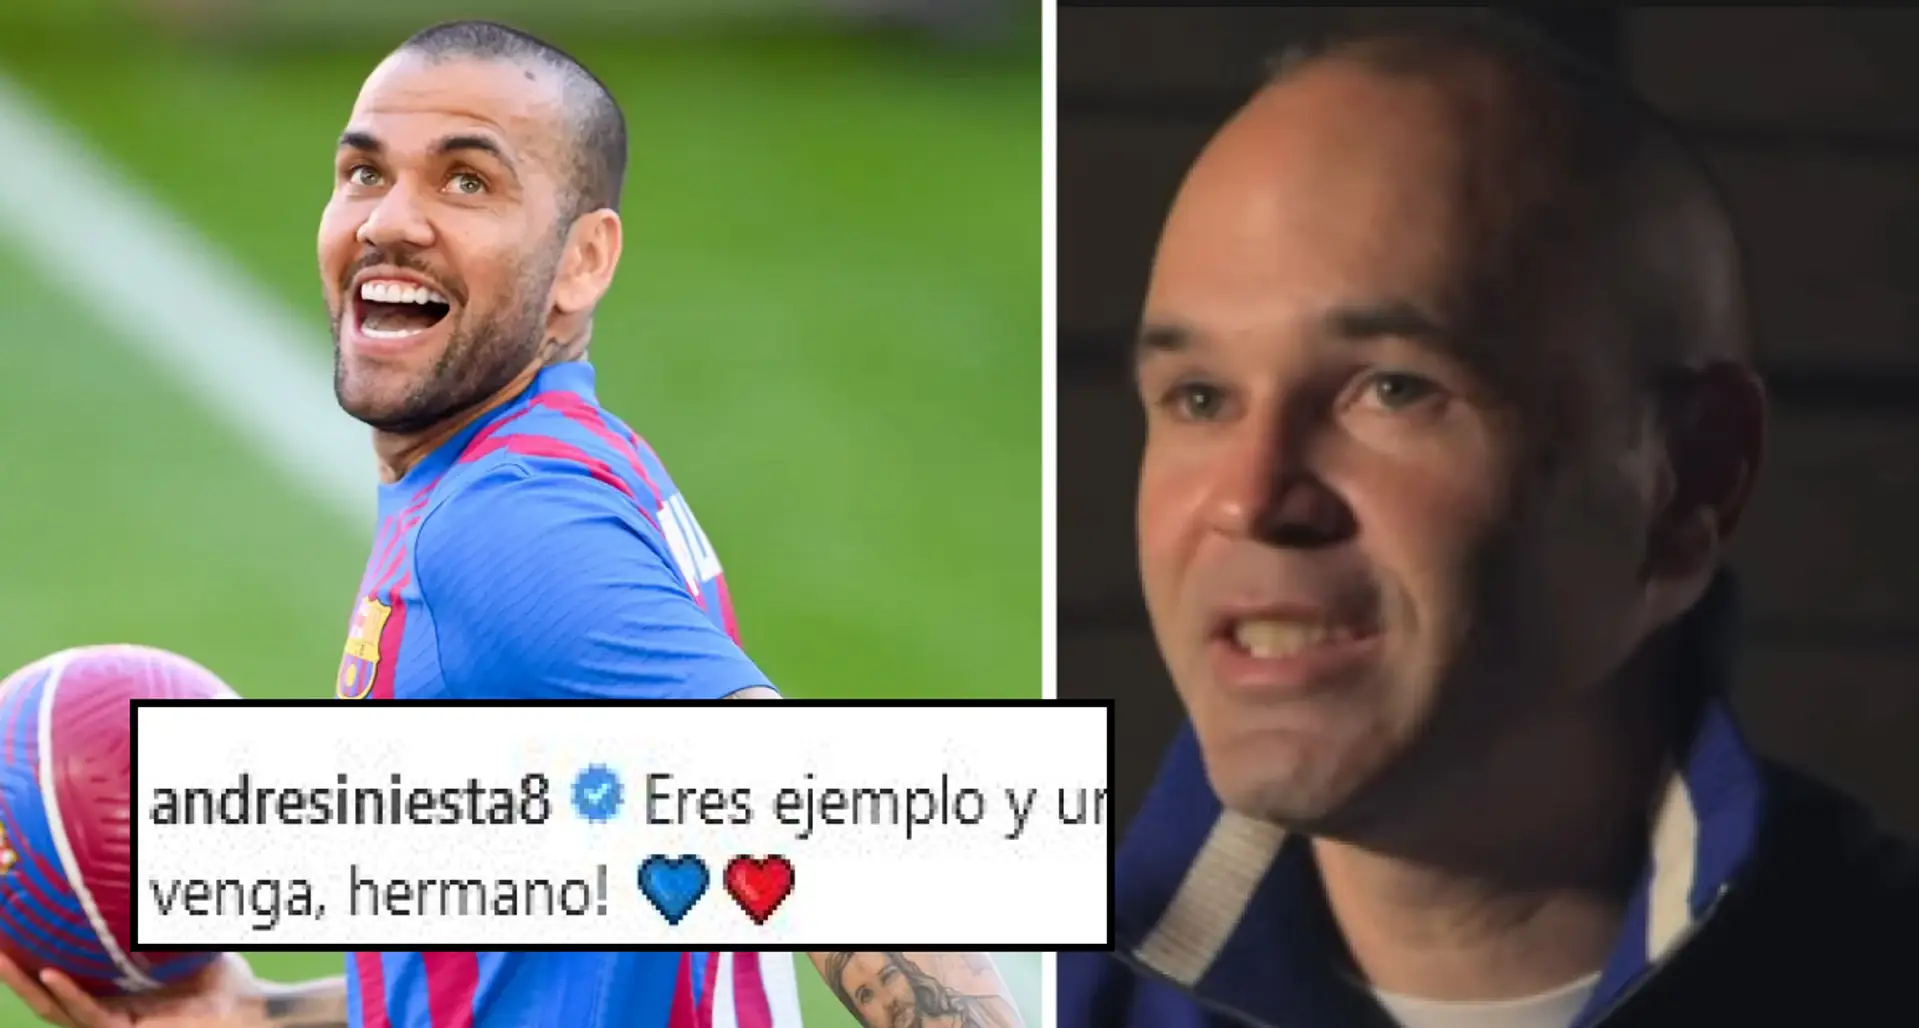 'You are an example': Iniesta and other stars pay tribute to Alves as he bids farewell to Barca